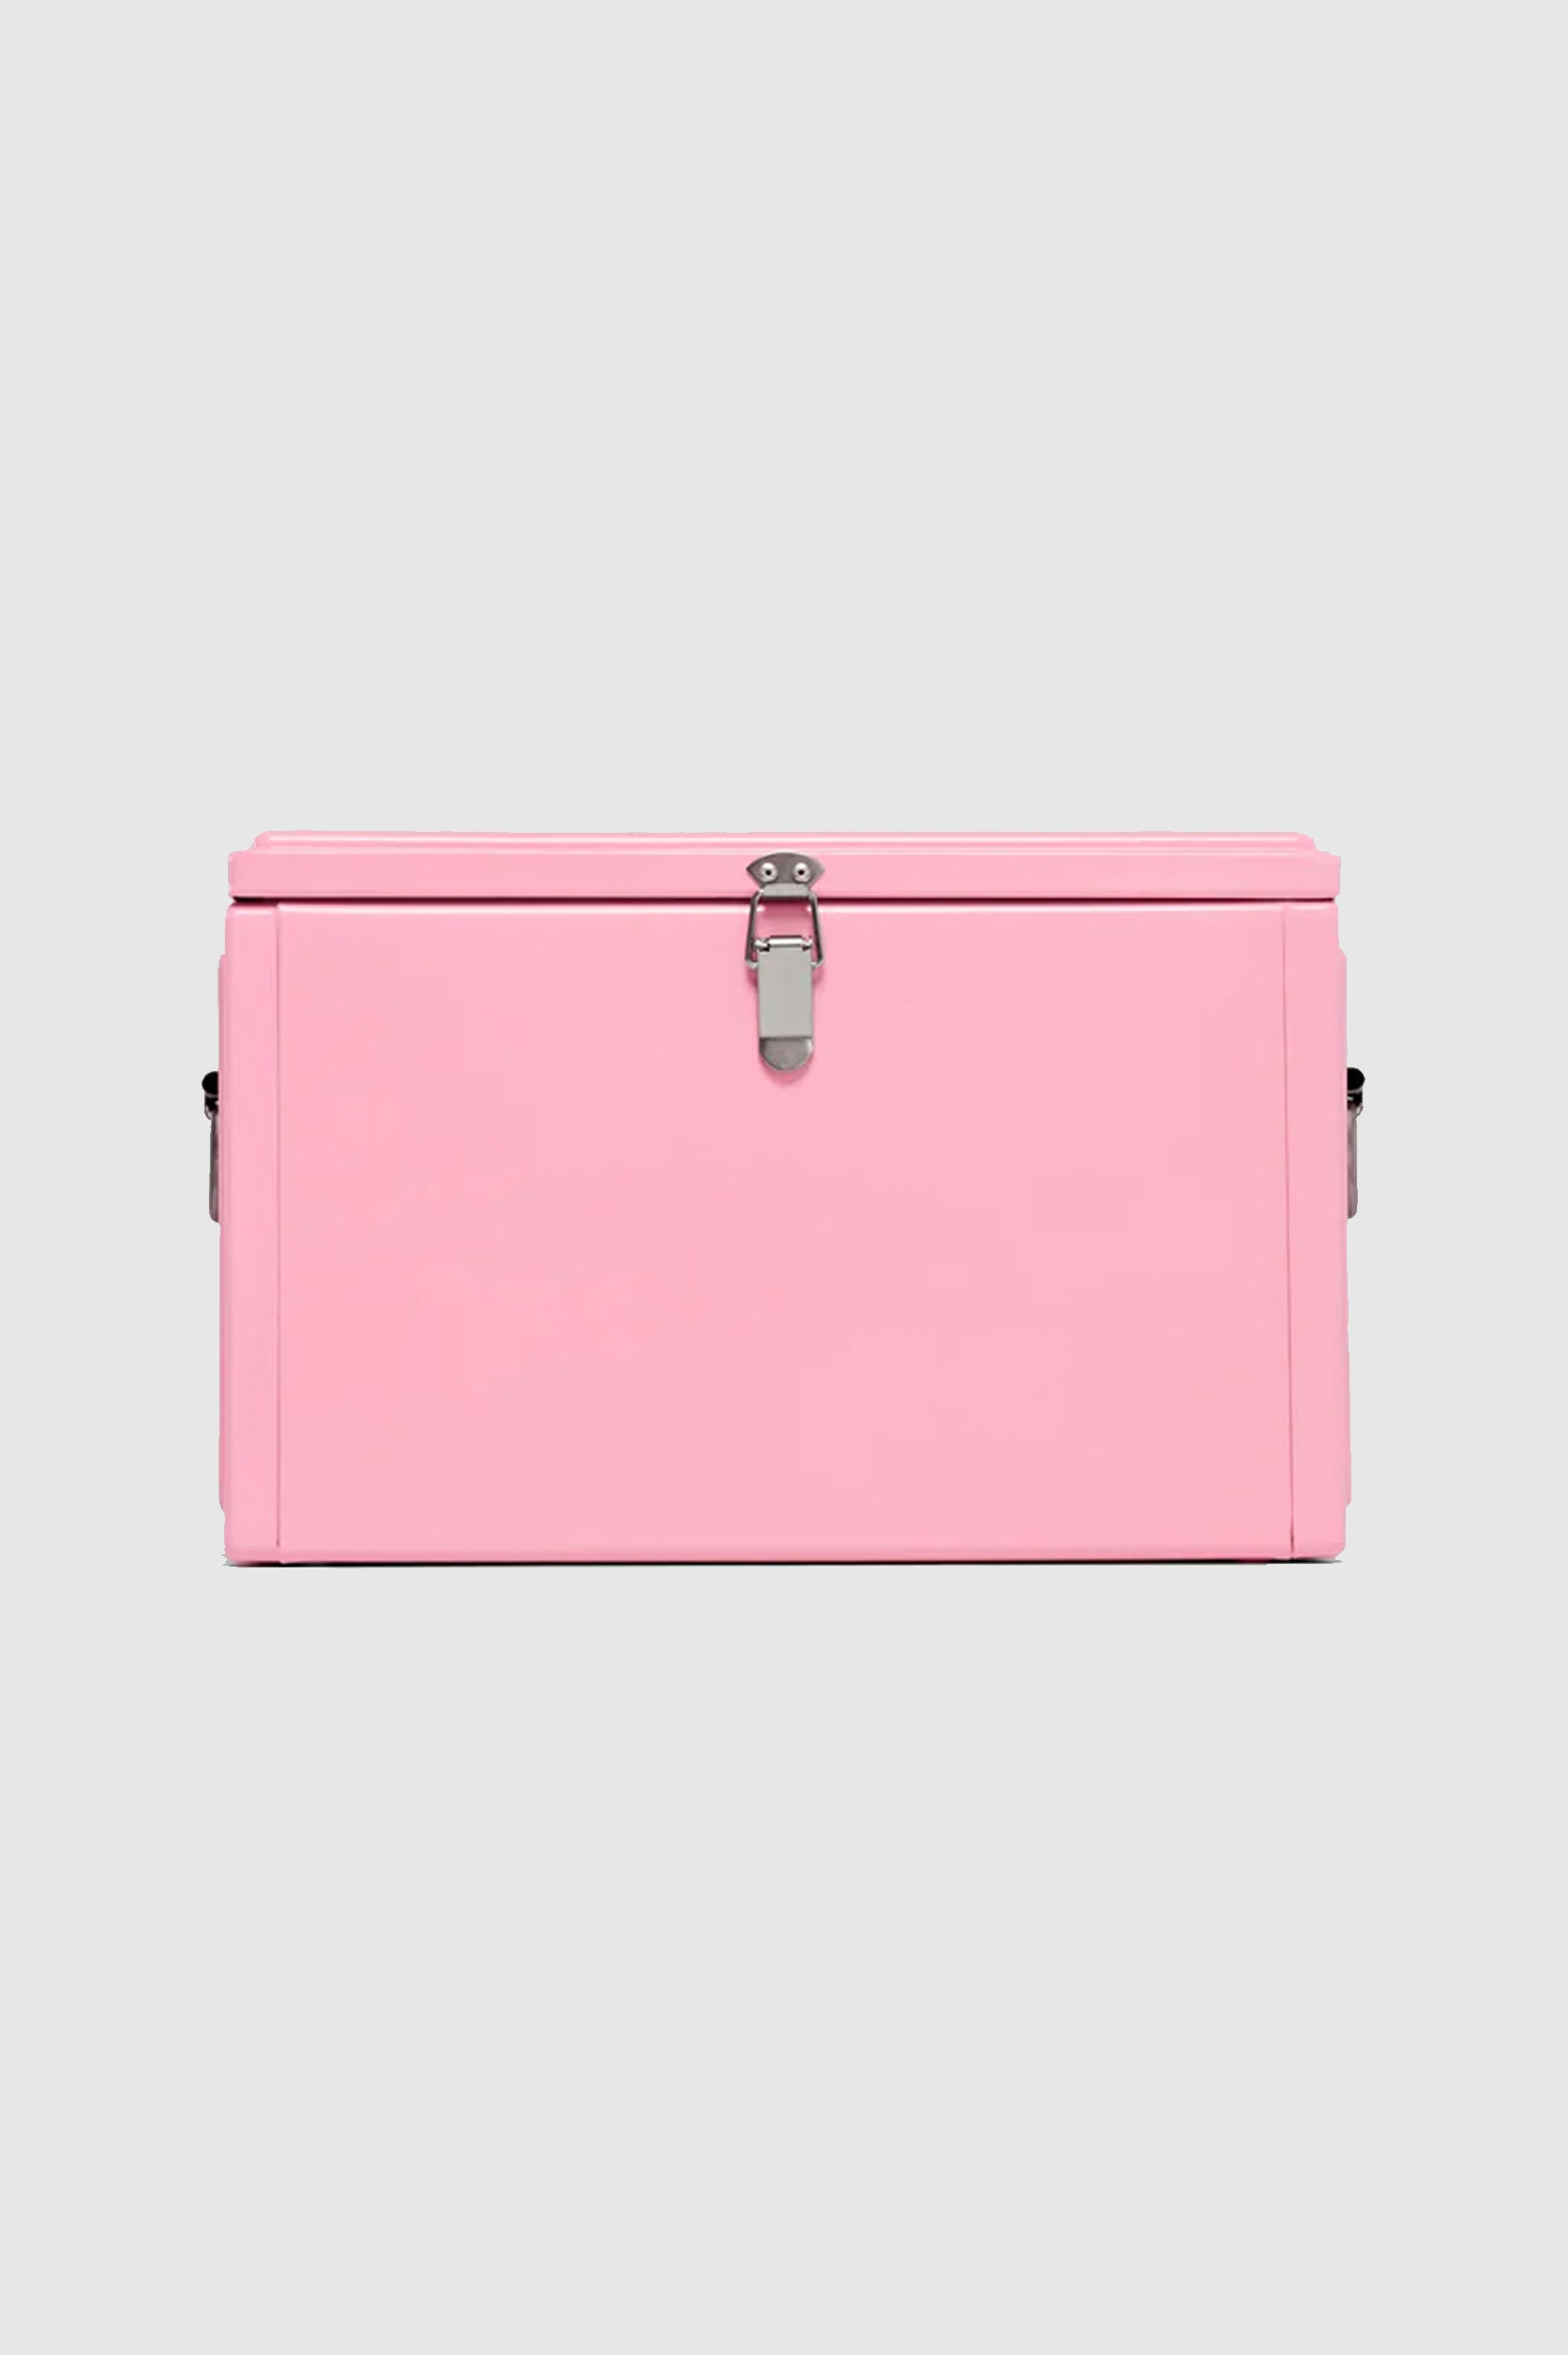 Napoleon Goods - Chilly Bin - Candy Pink